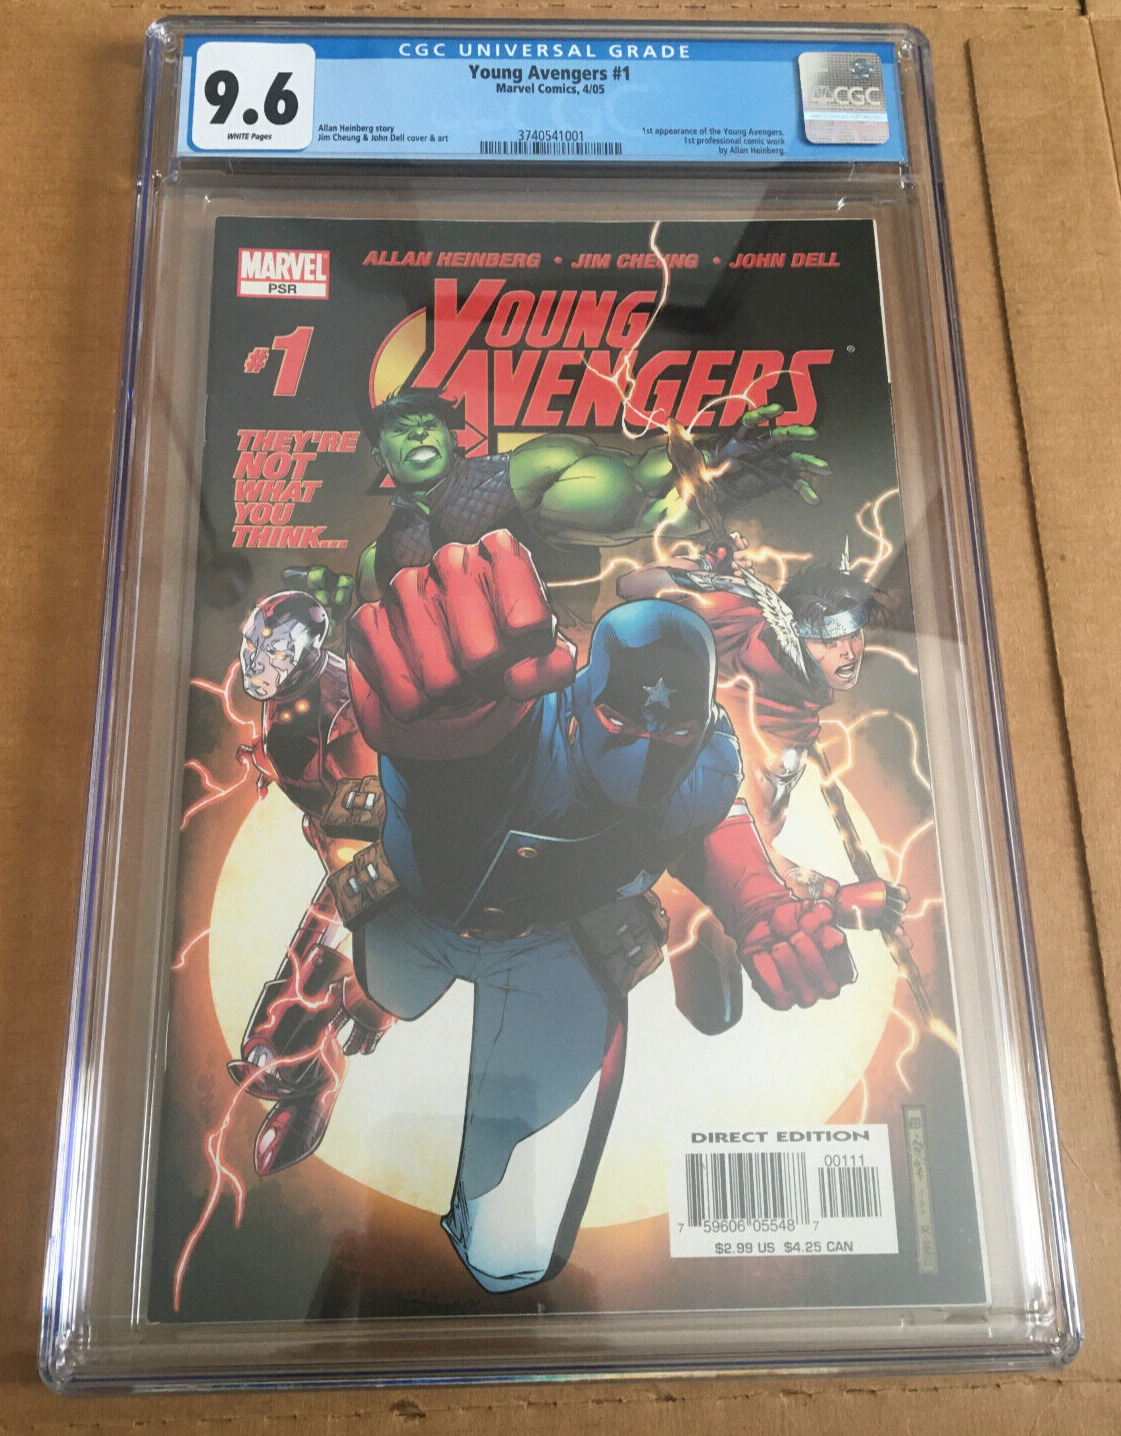 (Marvel Comics April 2005) YOUNG AVENGERS #1 CGC 9.6 KEY issue